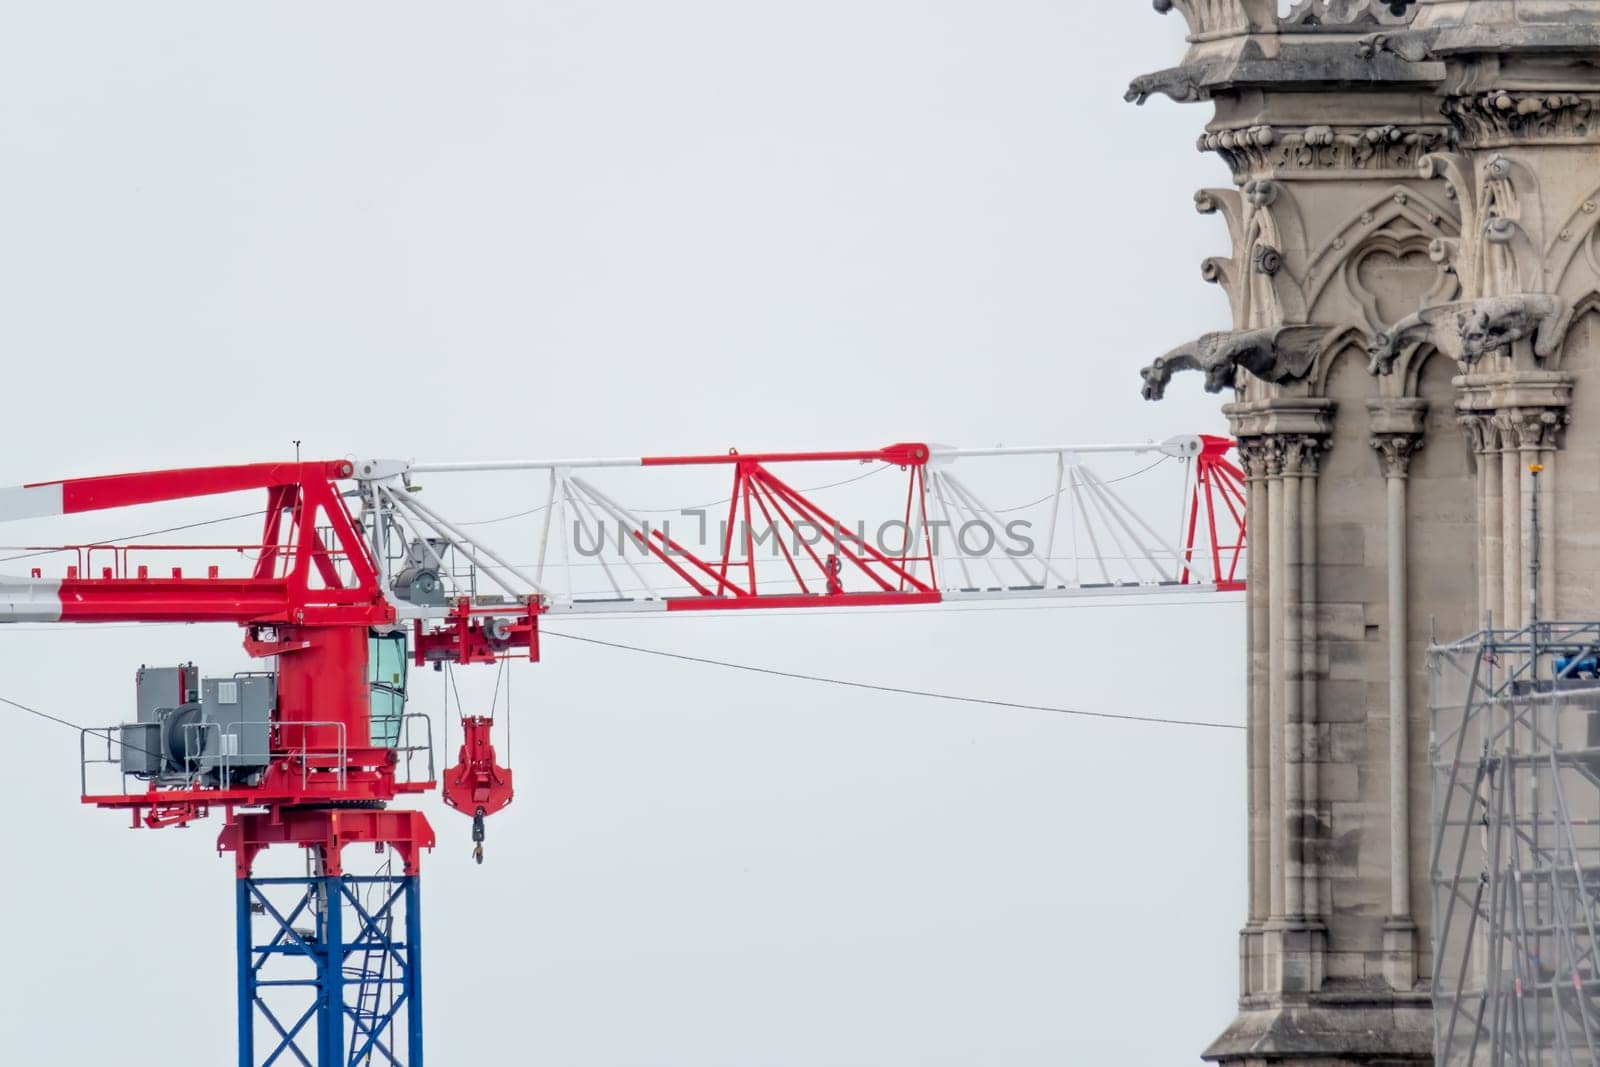 6 May 2023. Paris, France. Work continues on Notre Dame cathedral in preparation for the 2024 Olympics games. A construction crane is seen behind a tower with gargoyles at Notre Dame cathedral after the tragic fire in 2019